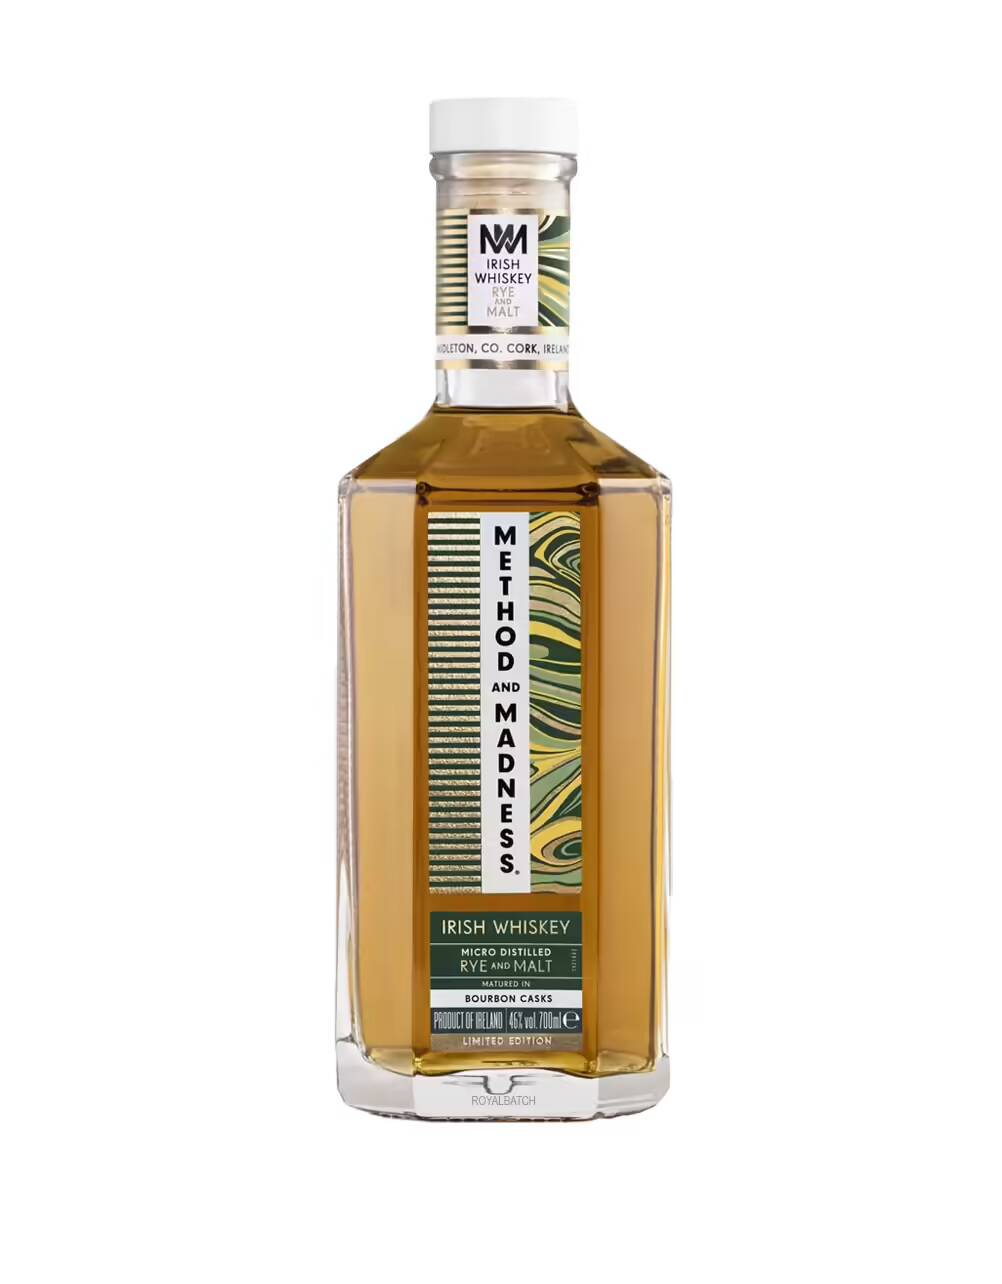 Method and Madness Tripled Distilled 92 Proof Limited Edition Rye and Malt Irish Whisky